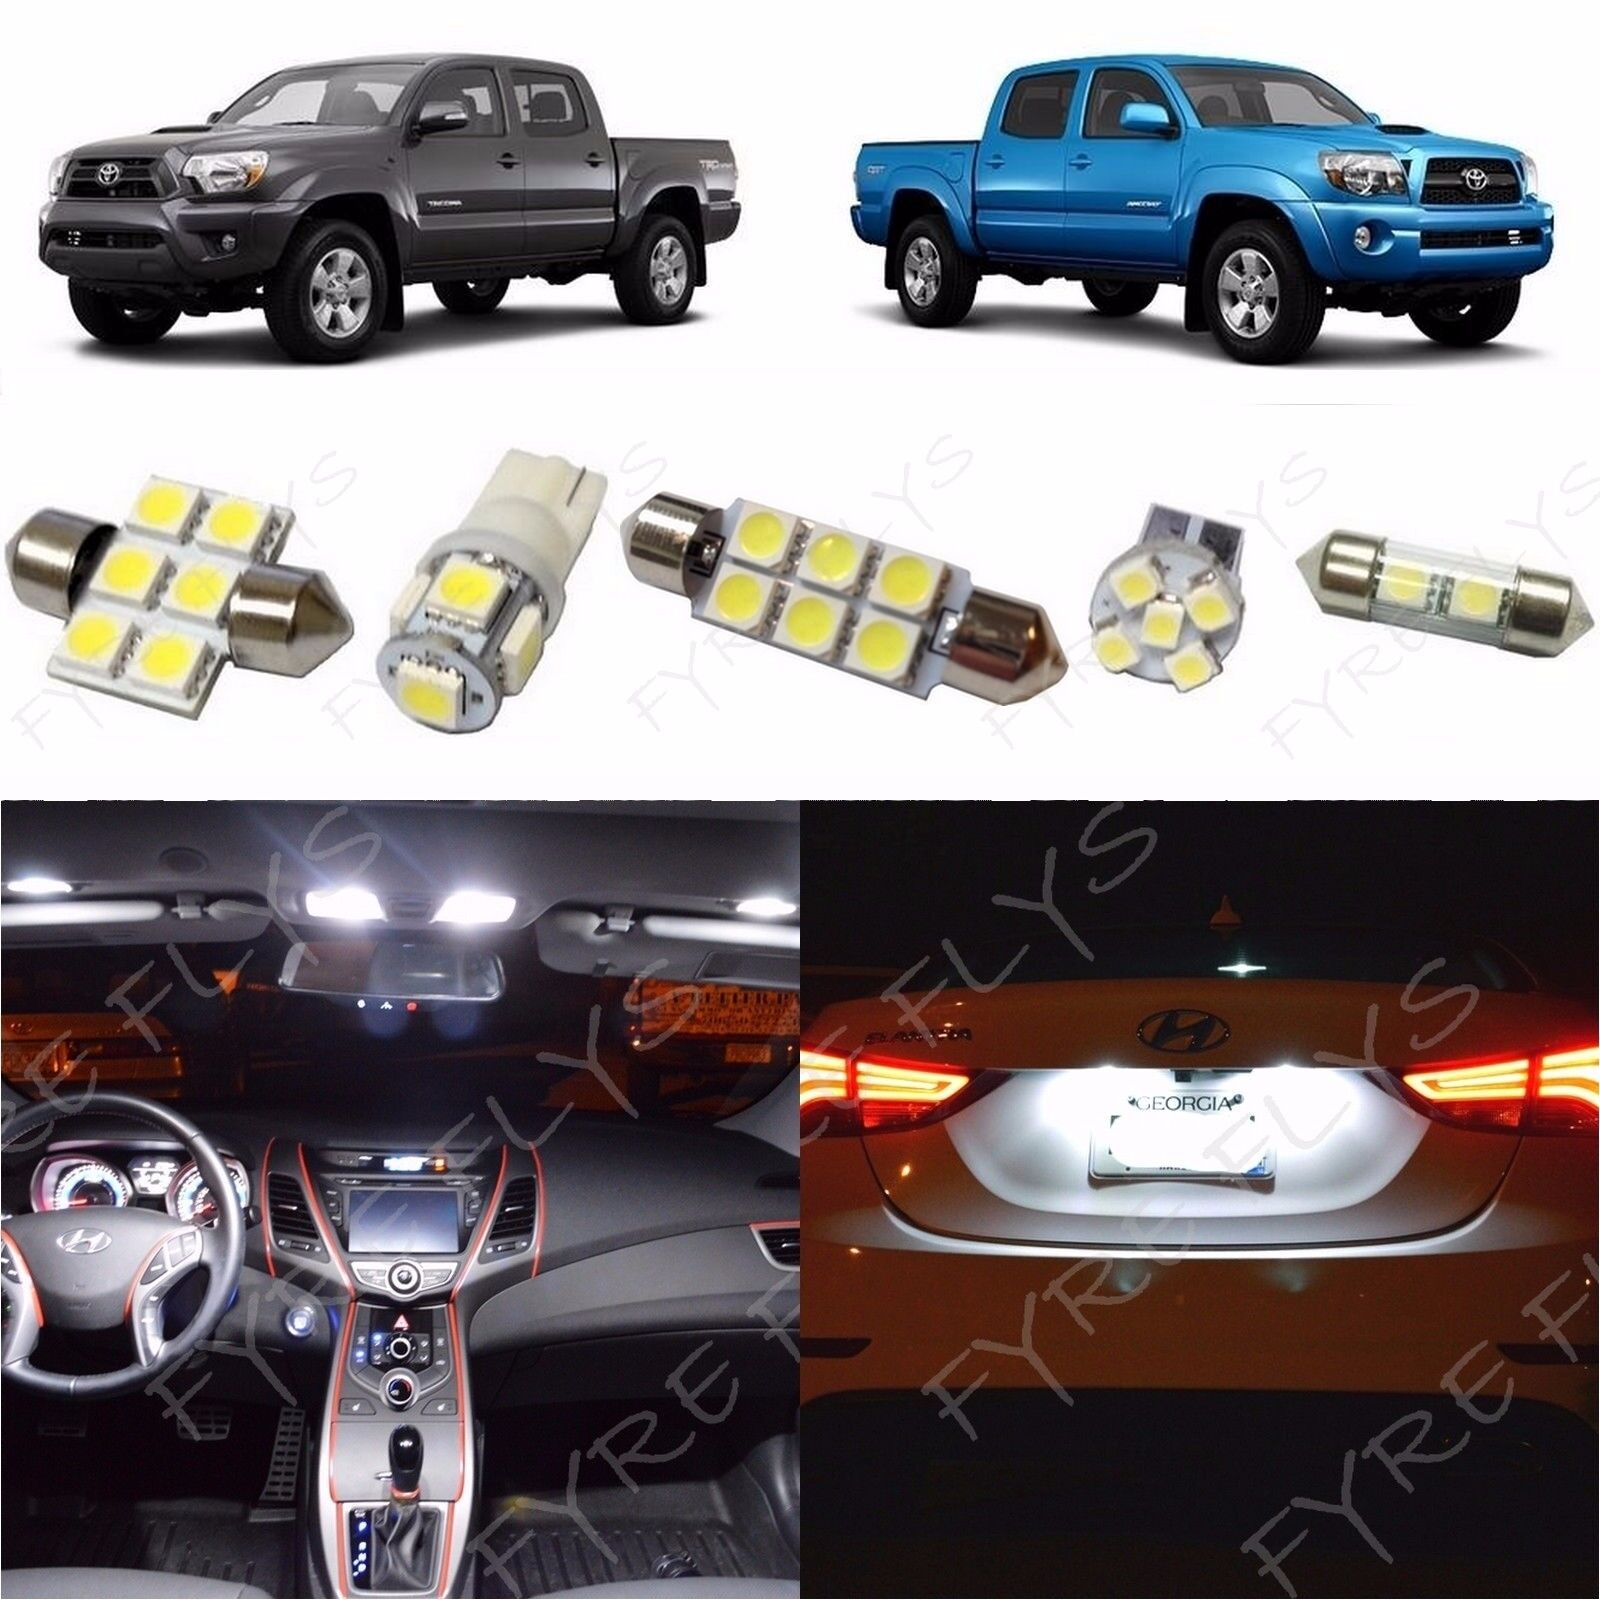 7x White LED interior Map Dome lights package kit for 2005-2015 Tacoma TT3W